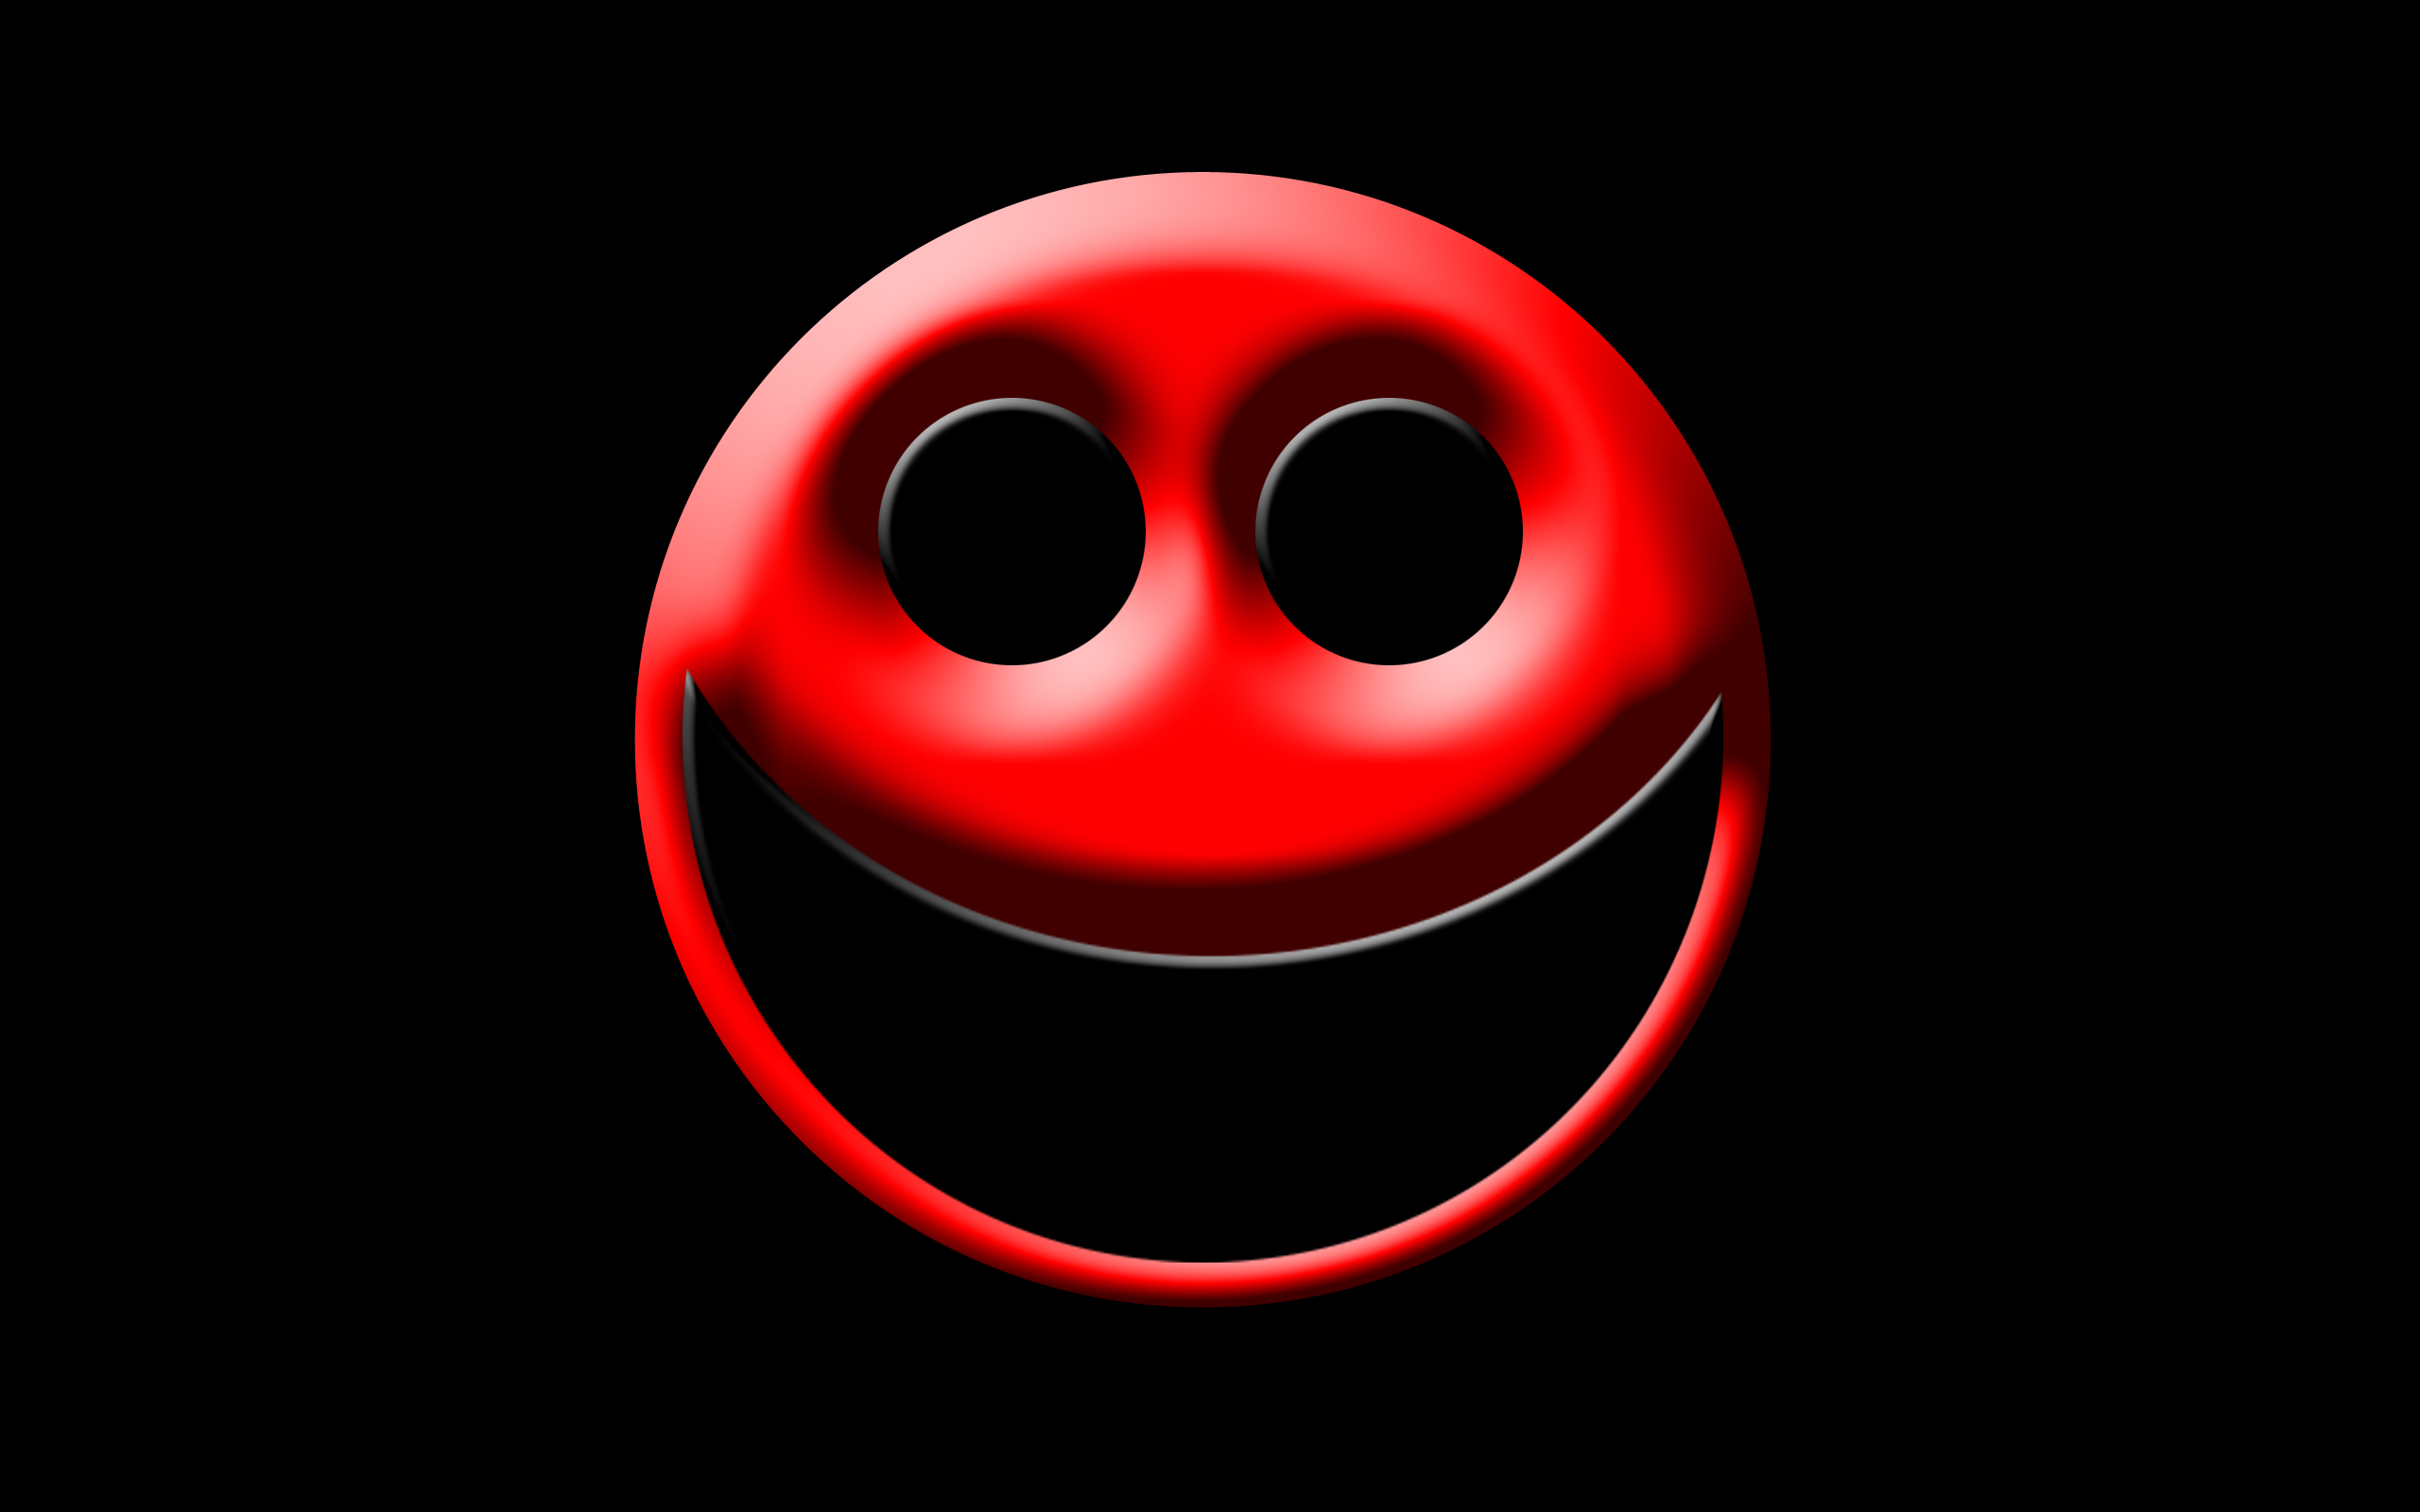 Wallpaper 24 Smiley Red and Black Wallpapers 2560x1600